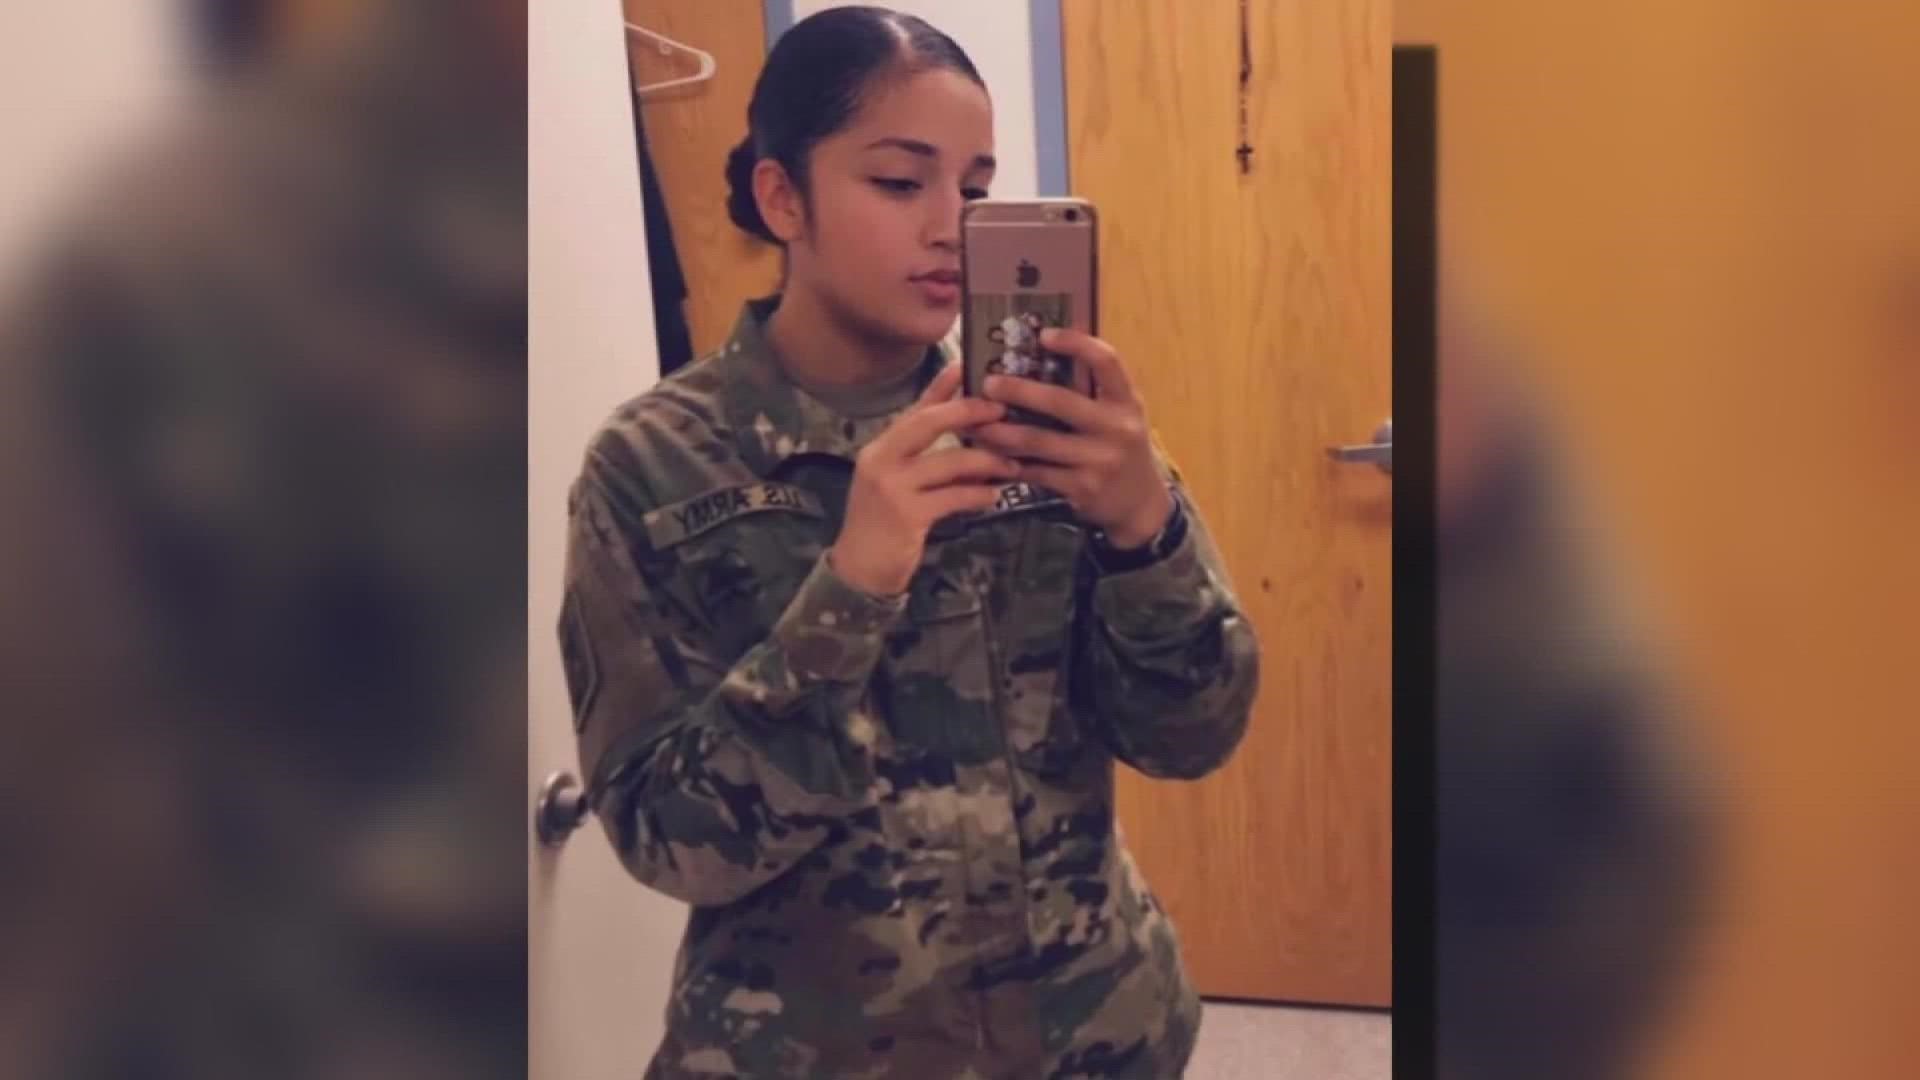 The 20-year-old Texas soldier was sexually harassed and killed at Fort Hood. Her family says she was also the victim of abuse, assault, rape and wrongful death.